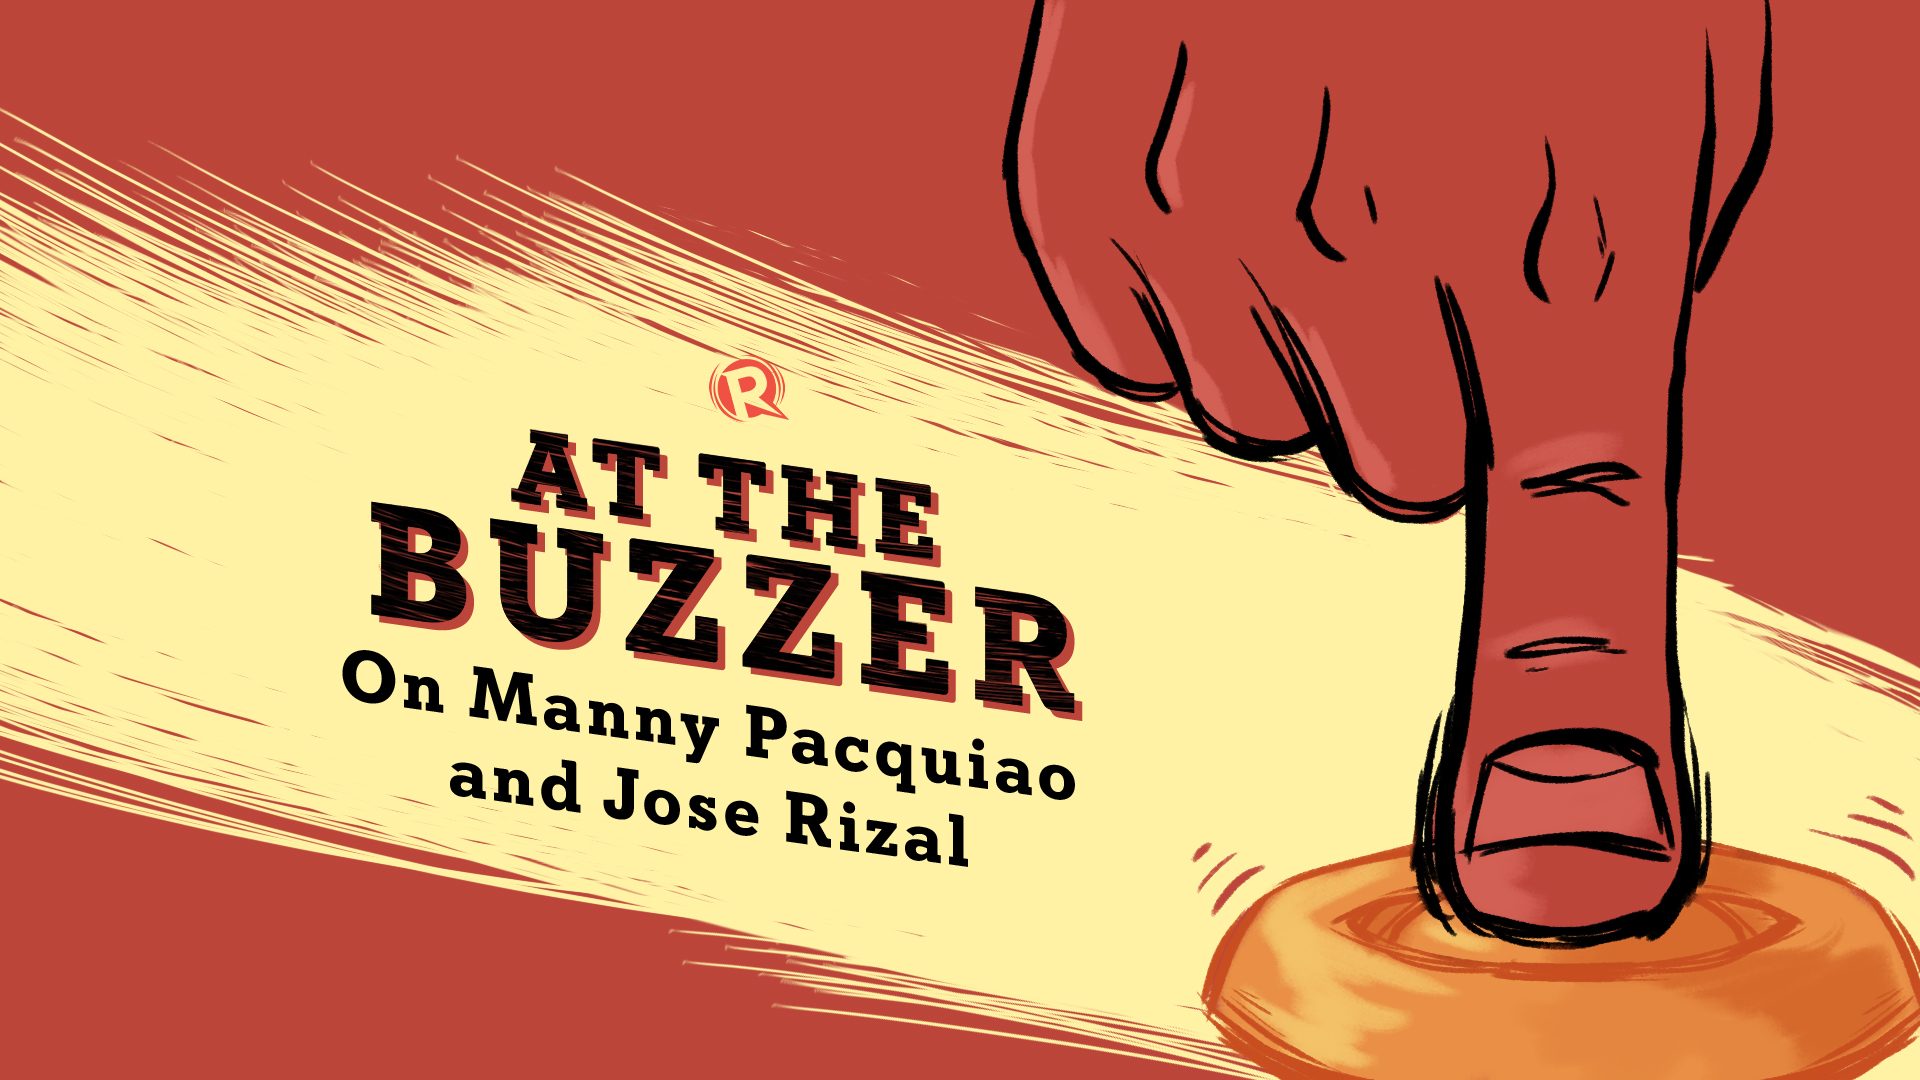 [PODCAST] At the Buzzer: On Manny Pacquiao and Jose Rizal